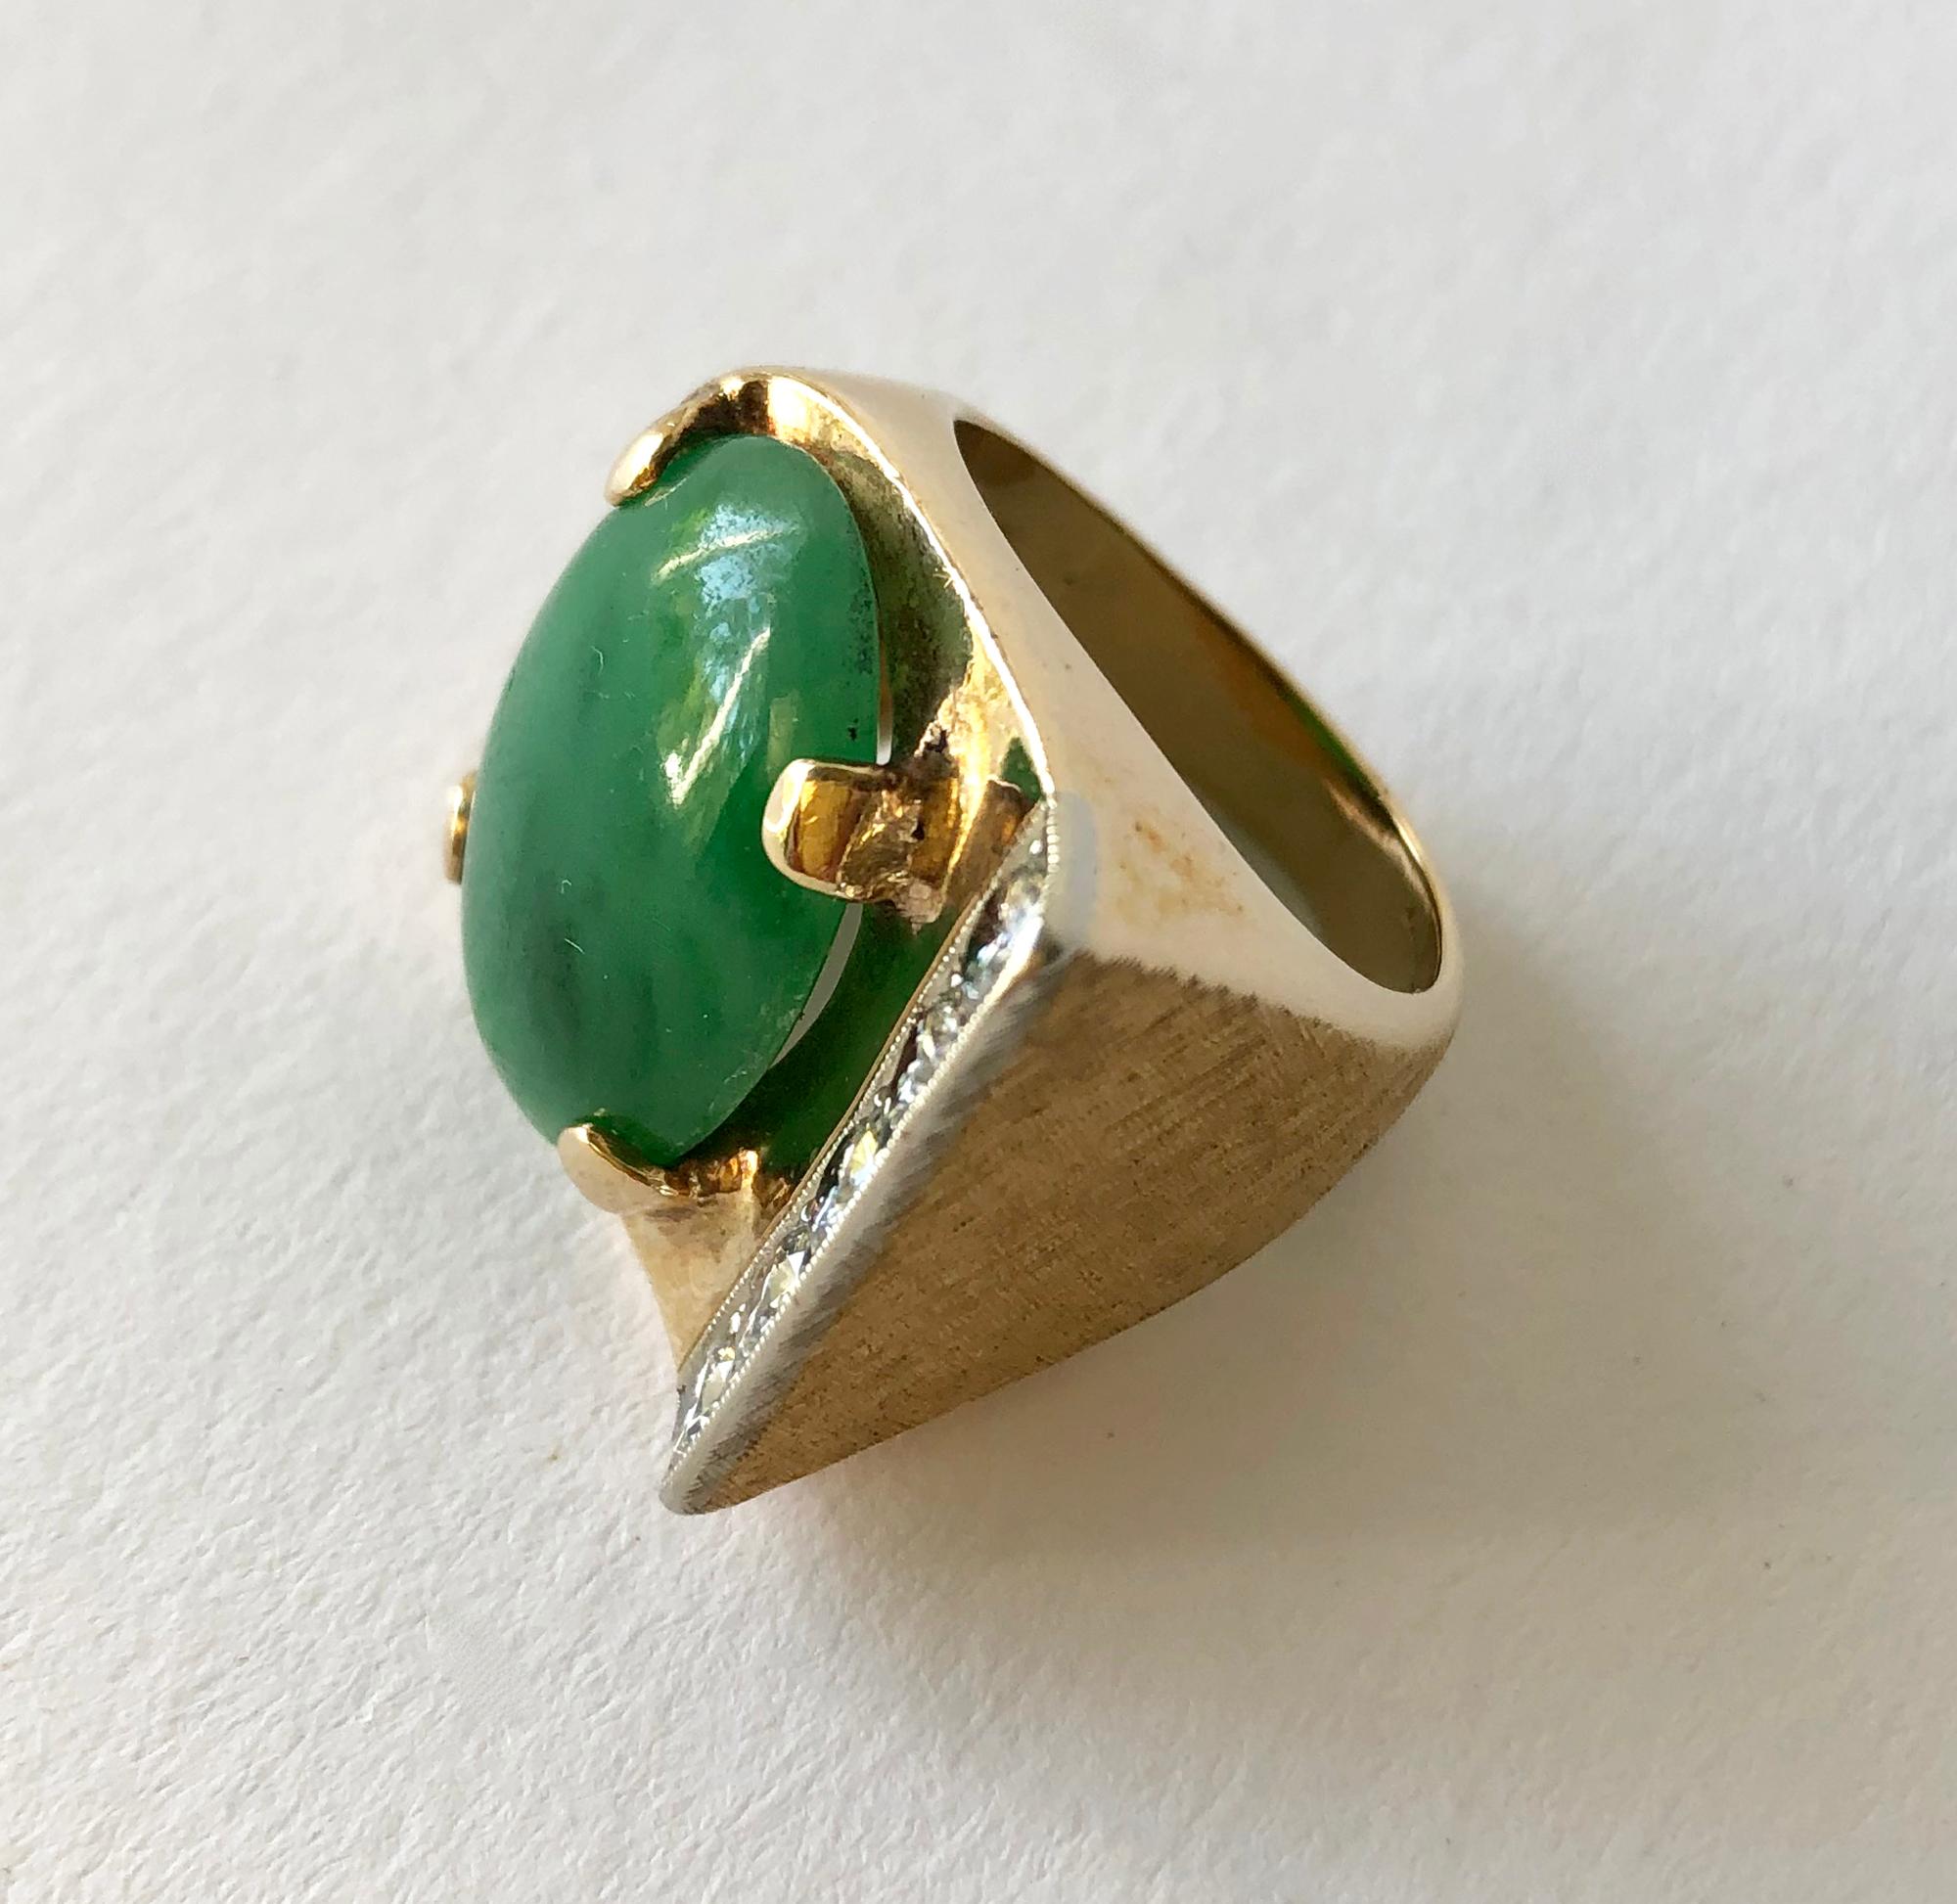 14K gold, jade and diamond heavy pinky ring, circa 1960's.  Ring is a finger size 6 and features a large jade cabochon and five diamonds at the rings flared edge.  It also has a Florentine finish on two sides.  It is signed 14K, with a partially